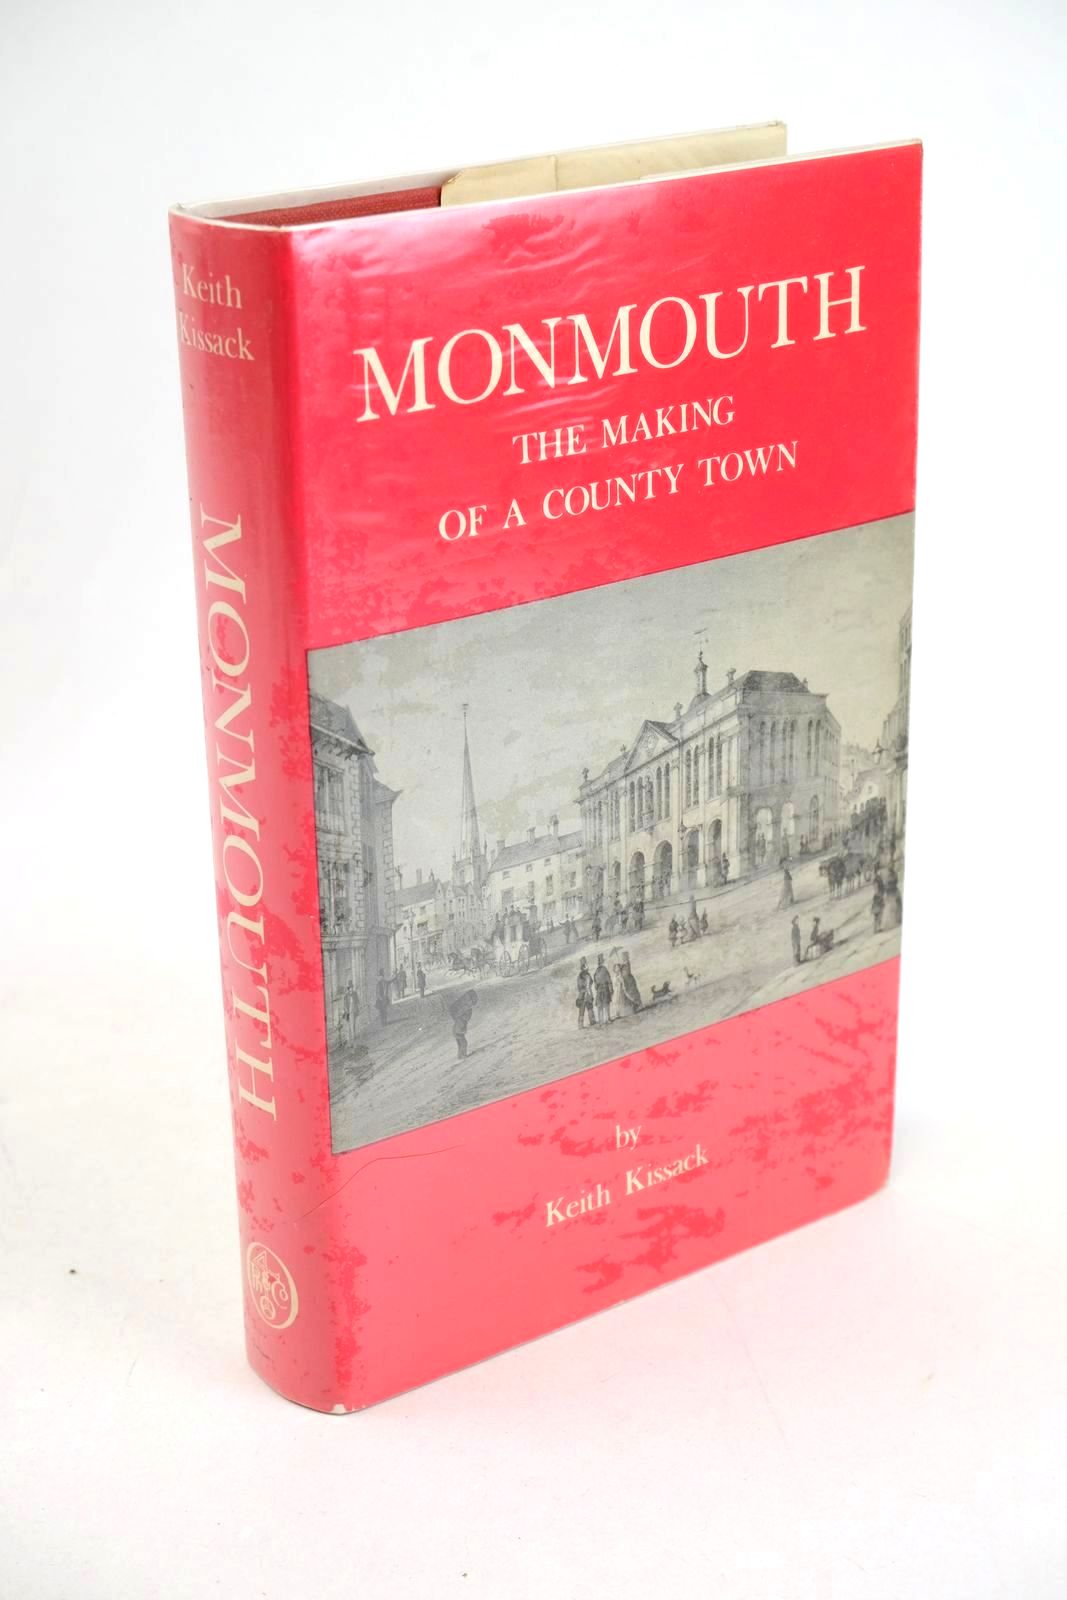 Photo of MONMOUTH THE MAKING OF A COUNTY TOWN written by Kissack, Keith published by Phillimore (STOCK CODE: 1327852)  for sale by Stella & Rose's Books